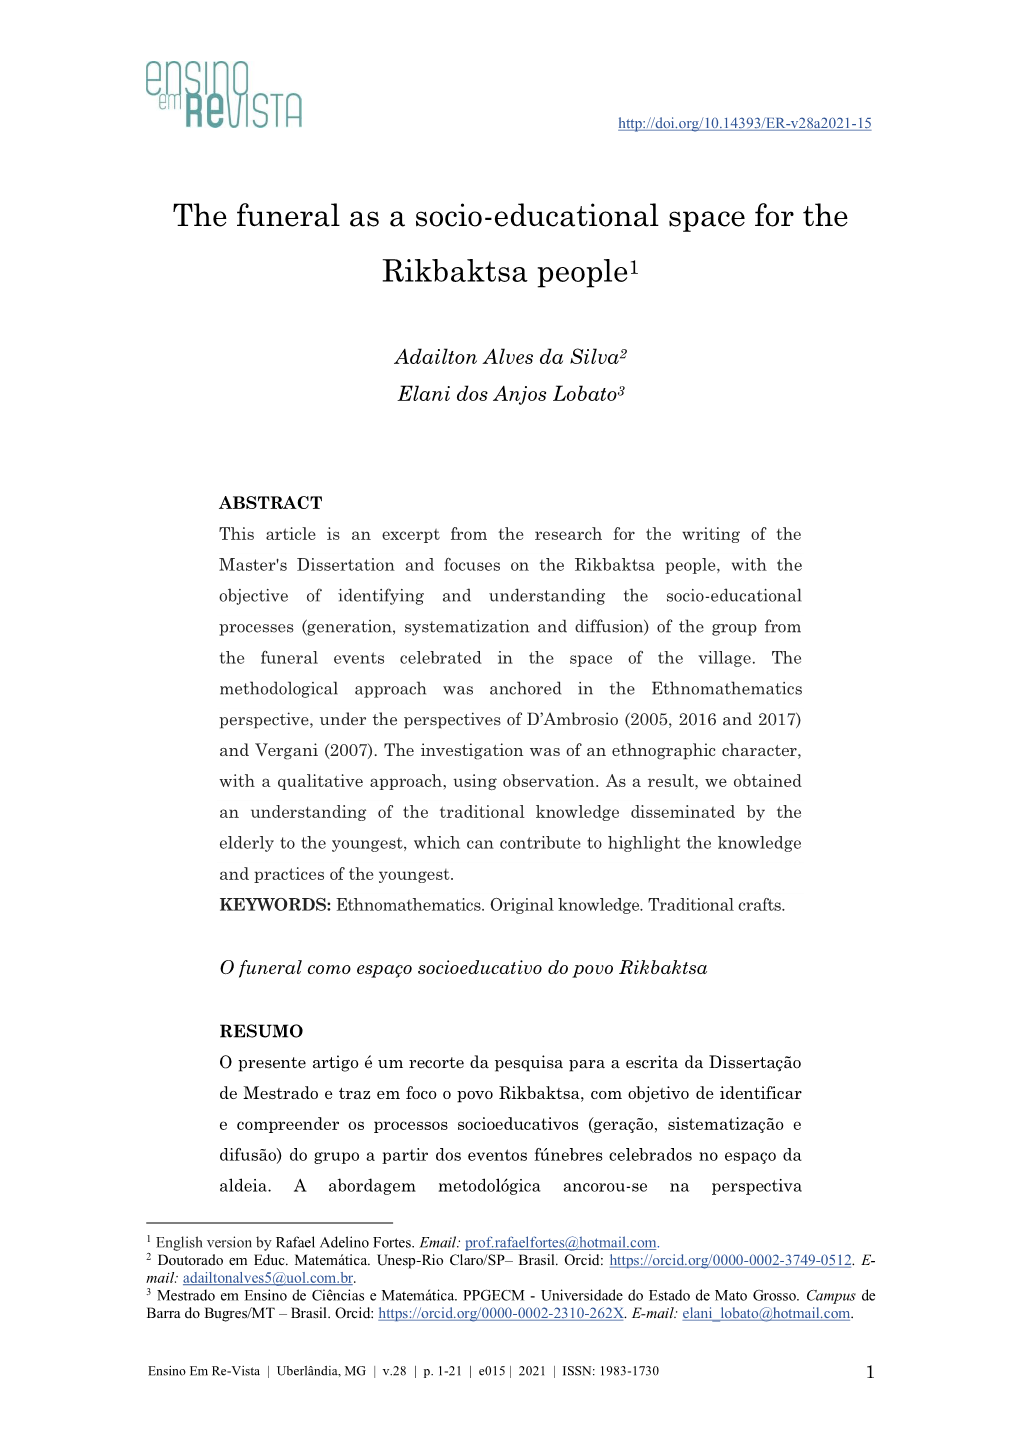 The Funeral As a Socio-Educational Space for the Rikbaktsa People1